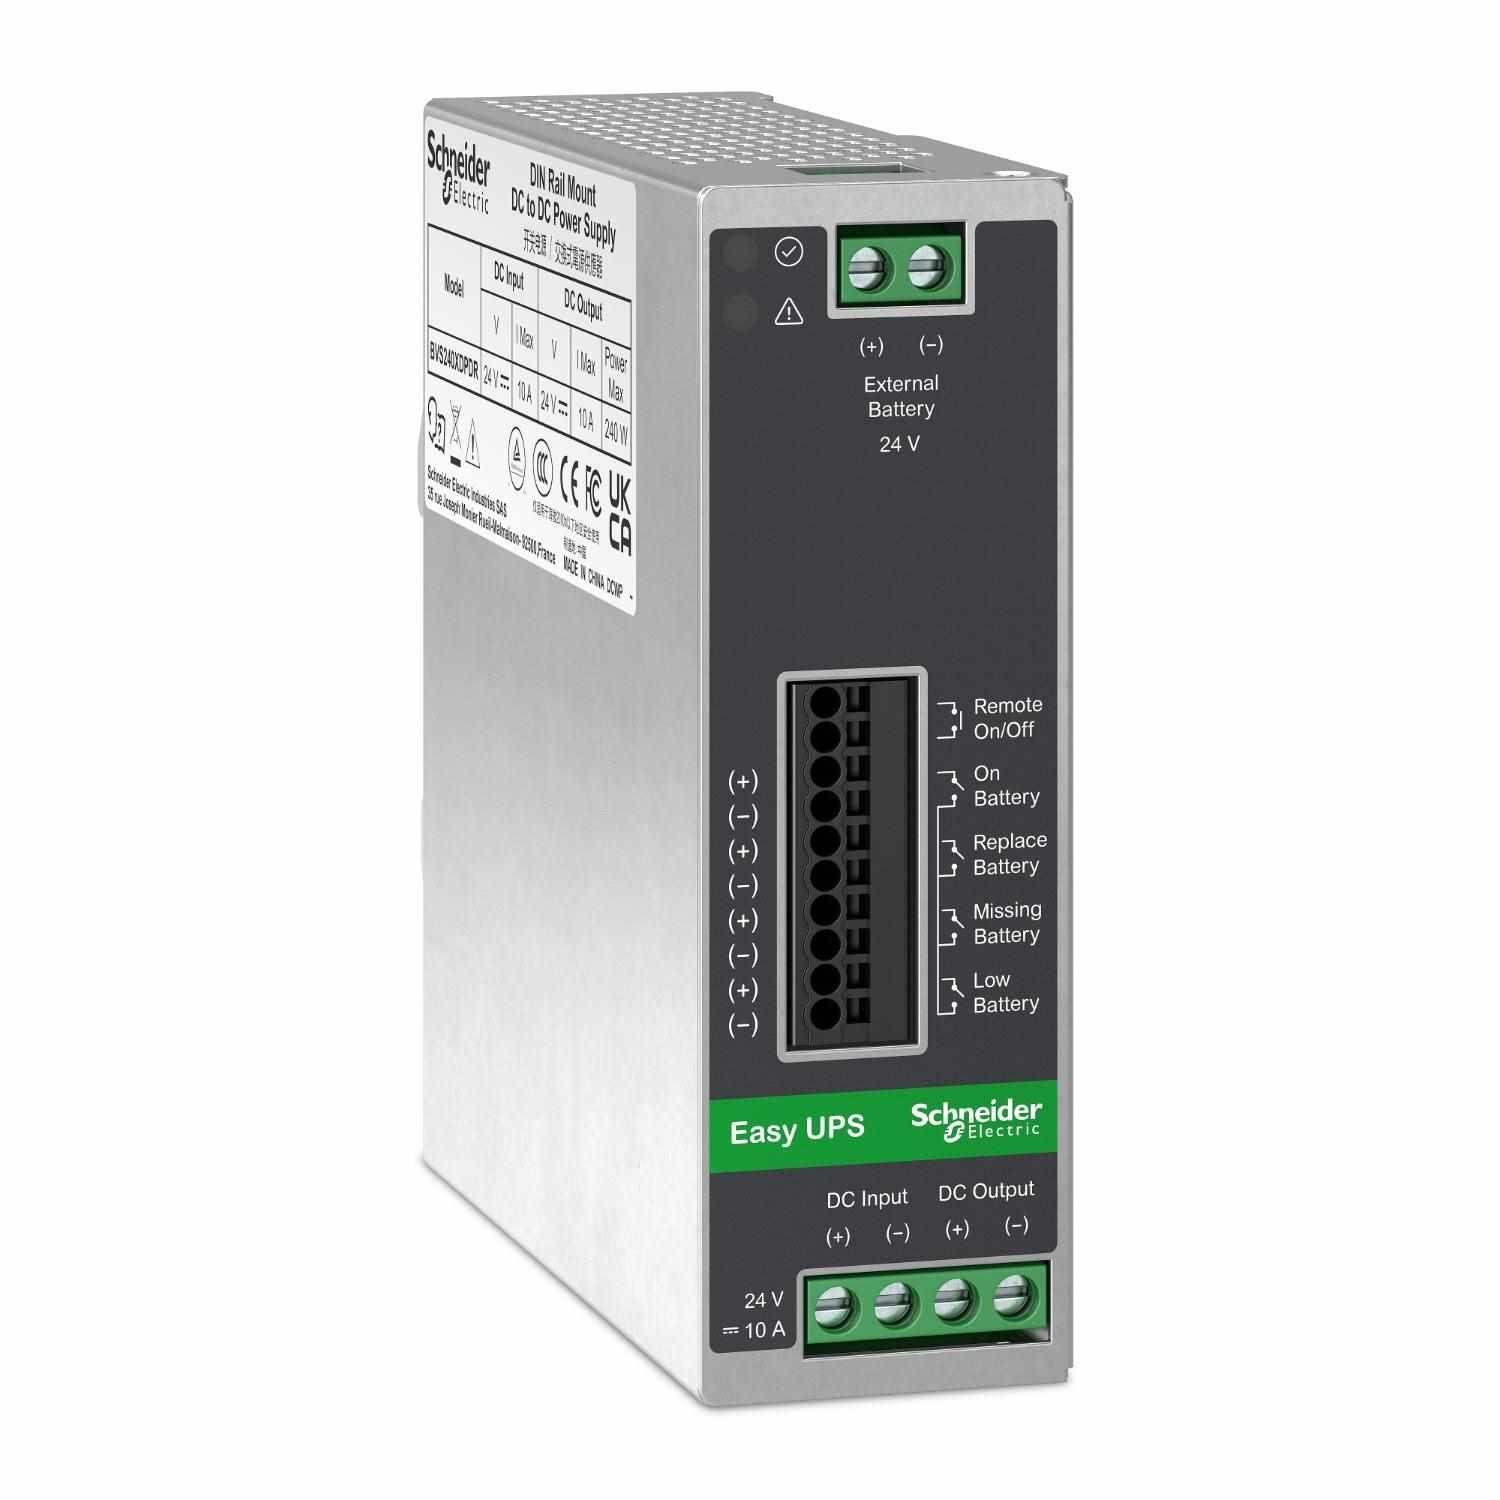 APC EASY UPS Din Rail Mount Switch Power Supply Battery Back Up 24V DC 10 A,  240W2 